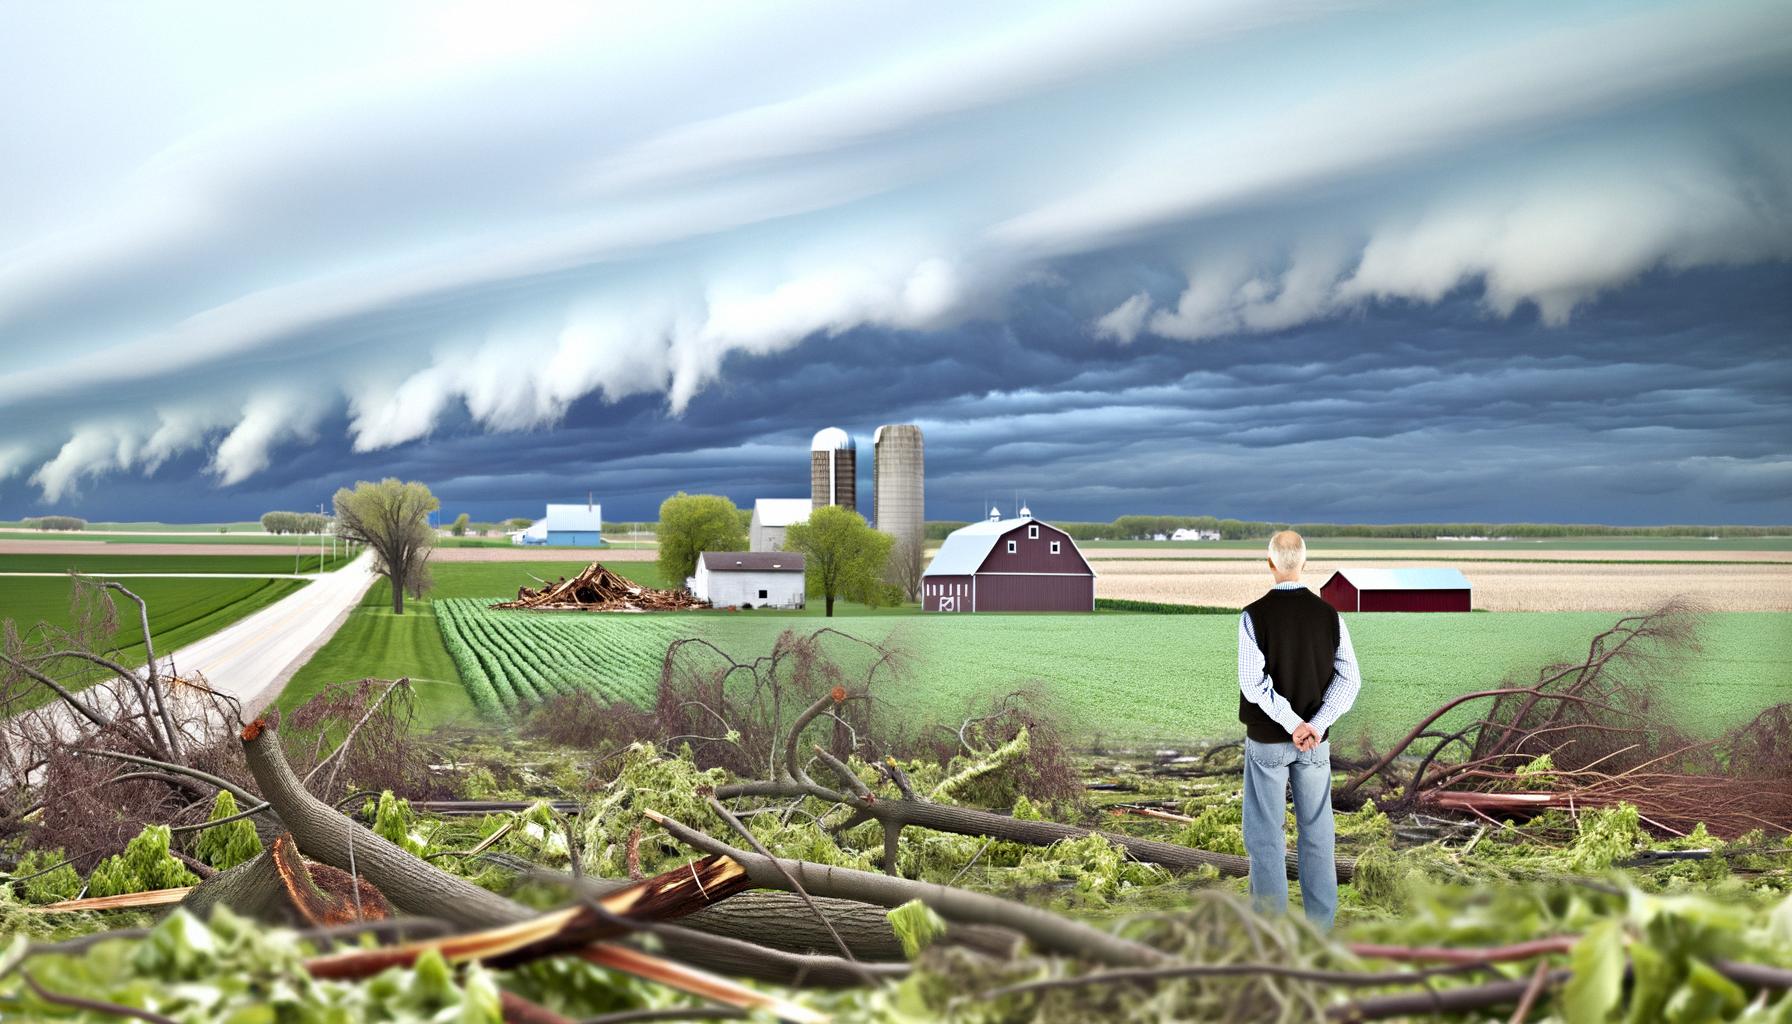 Increased severe weather events in the Midwest cause significant damage